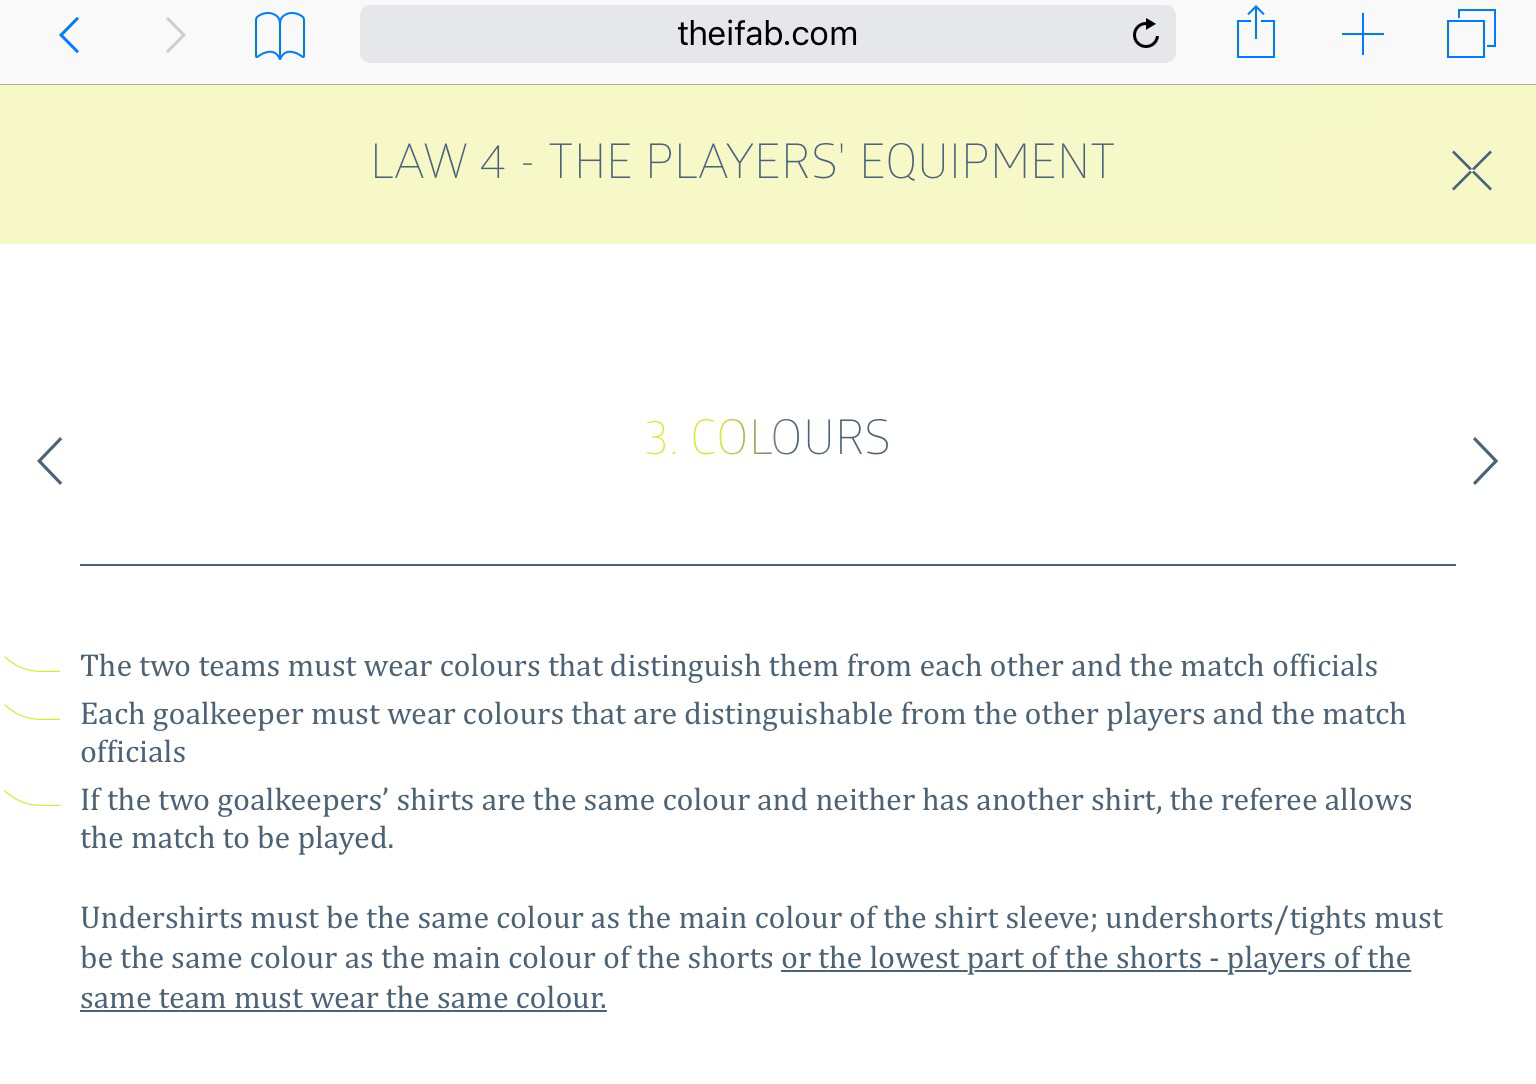 Law 4 - The Players' Equipment